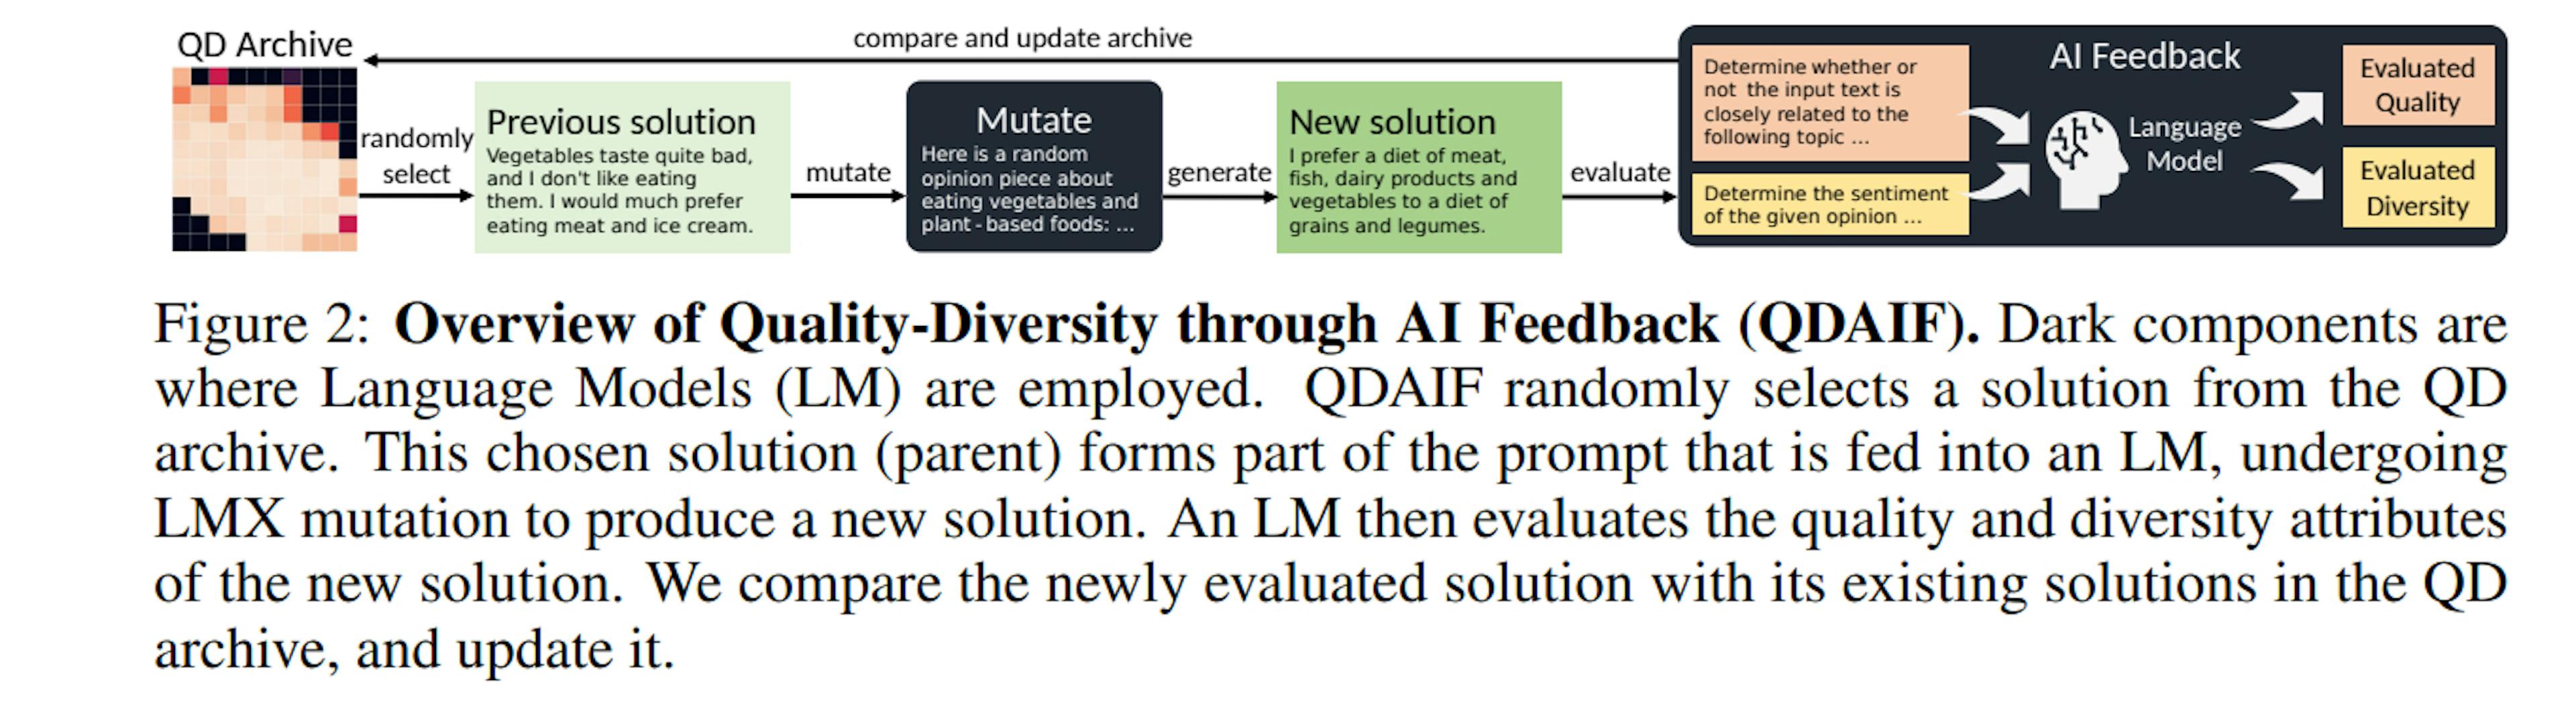 featured image - Quality-Diversity through AI Feedback: Approach